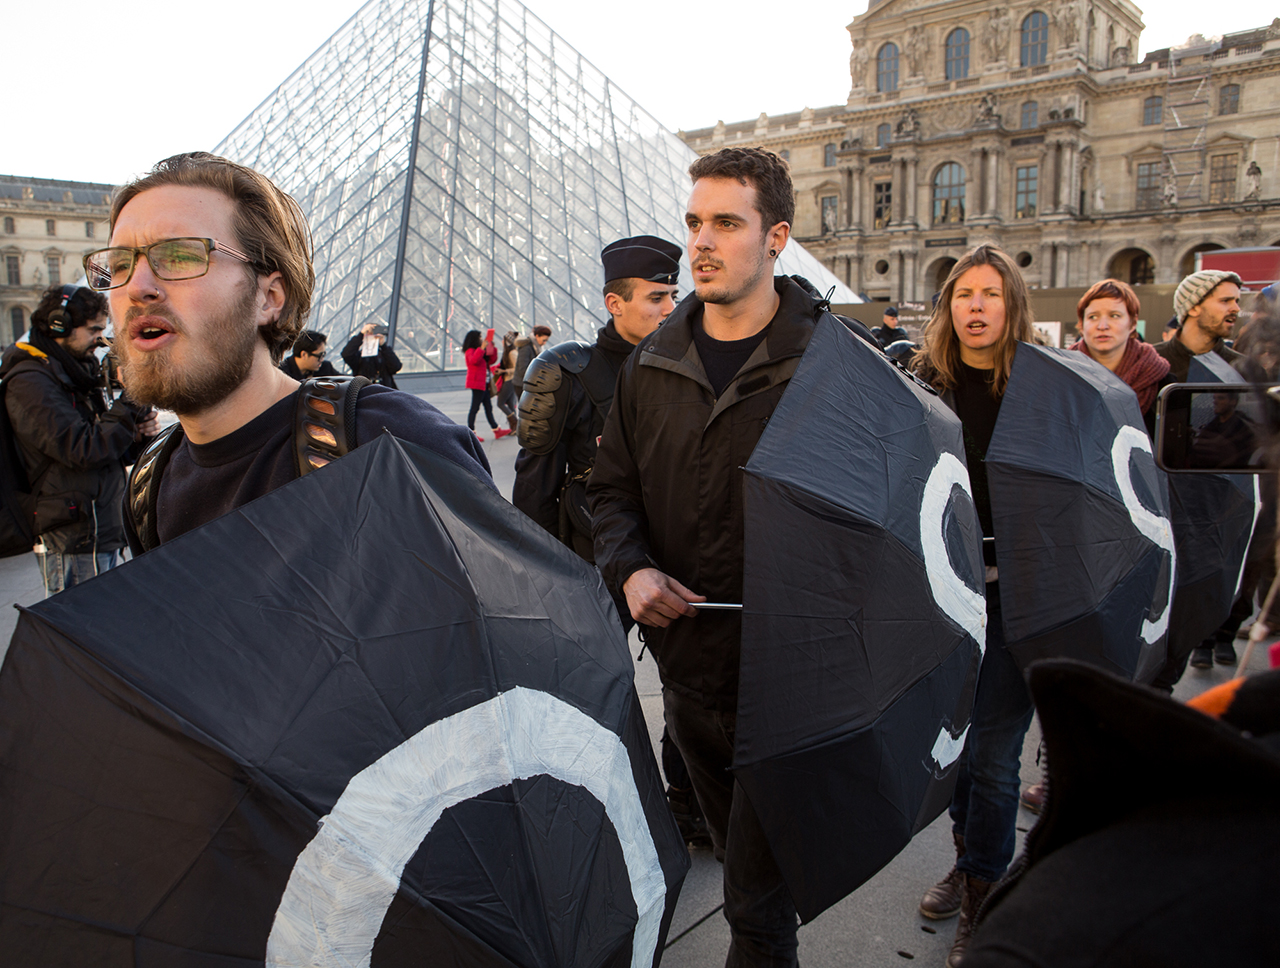 Protesters in front of the Louvre